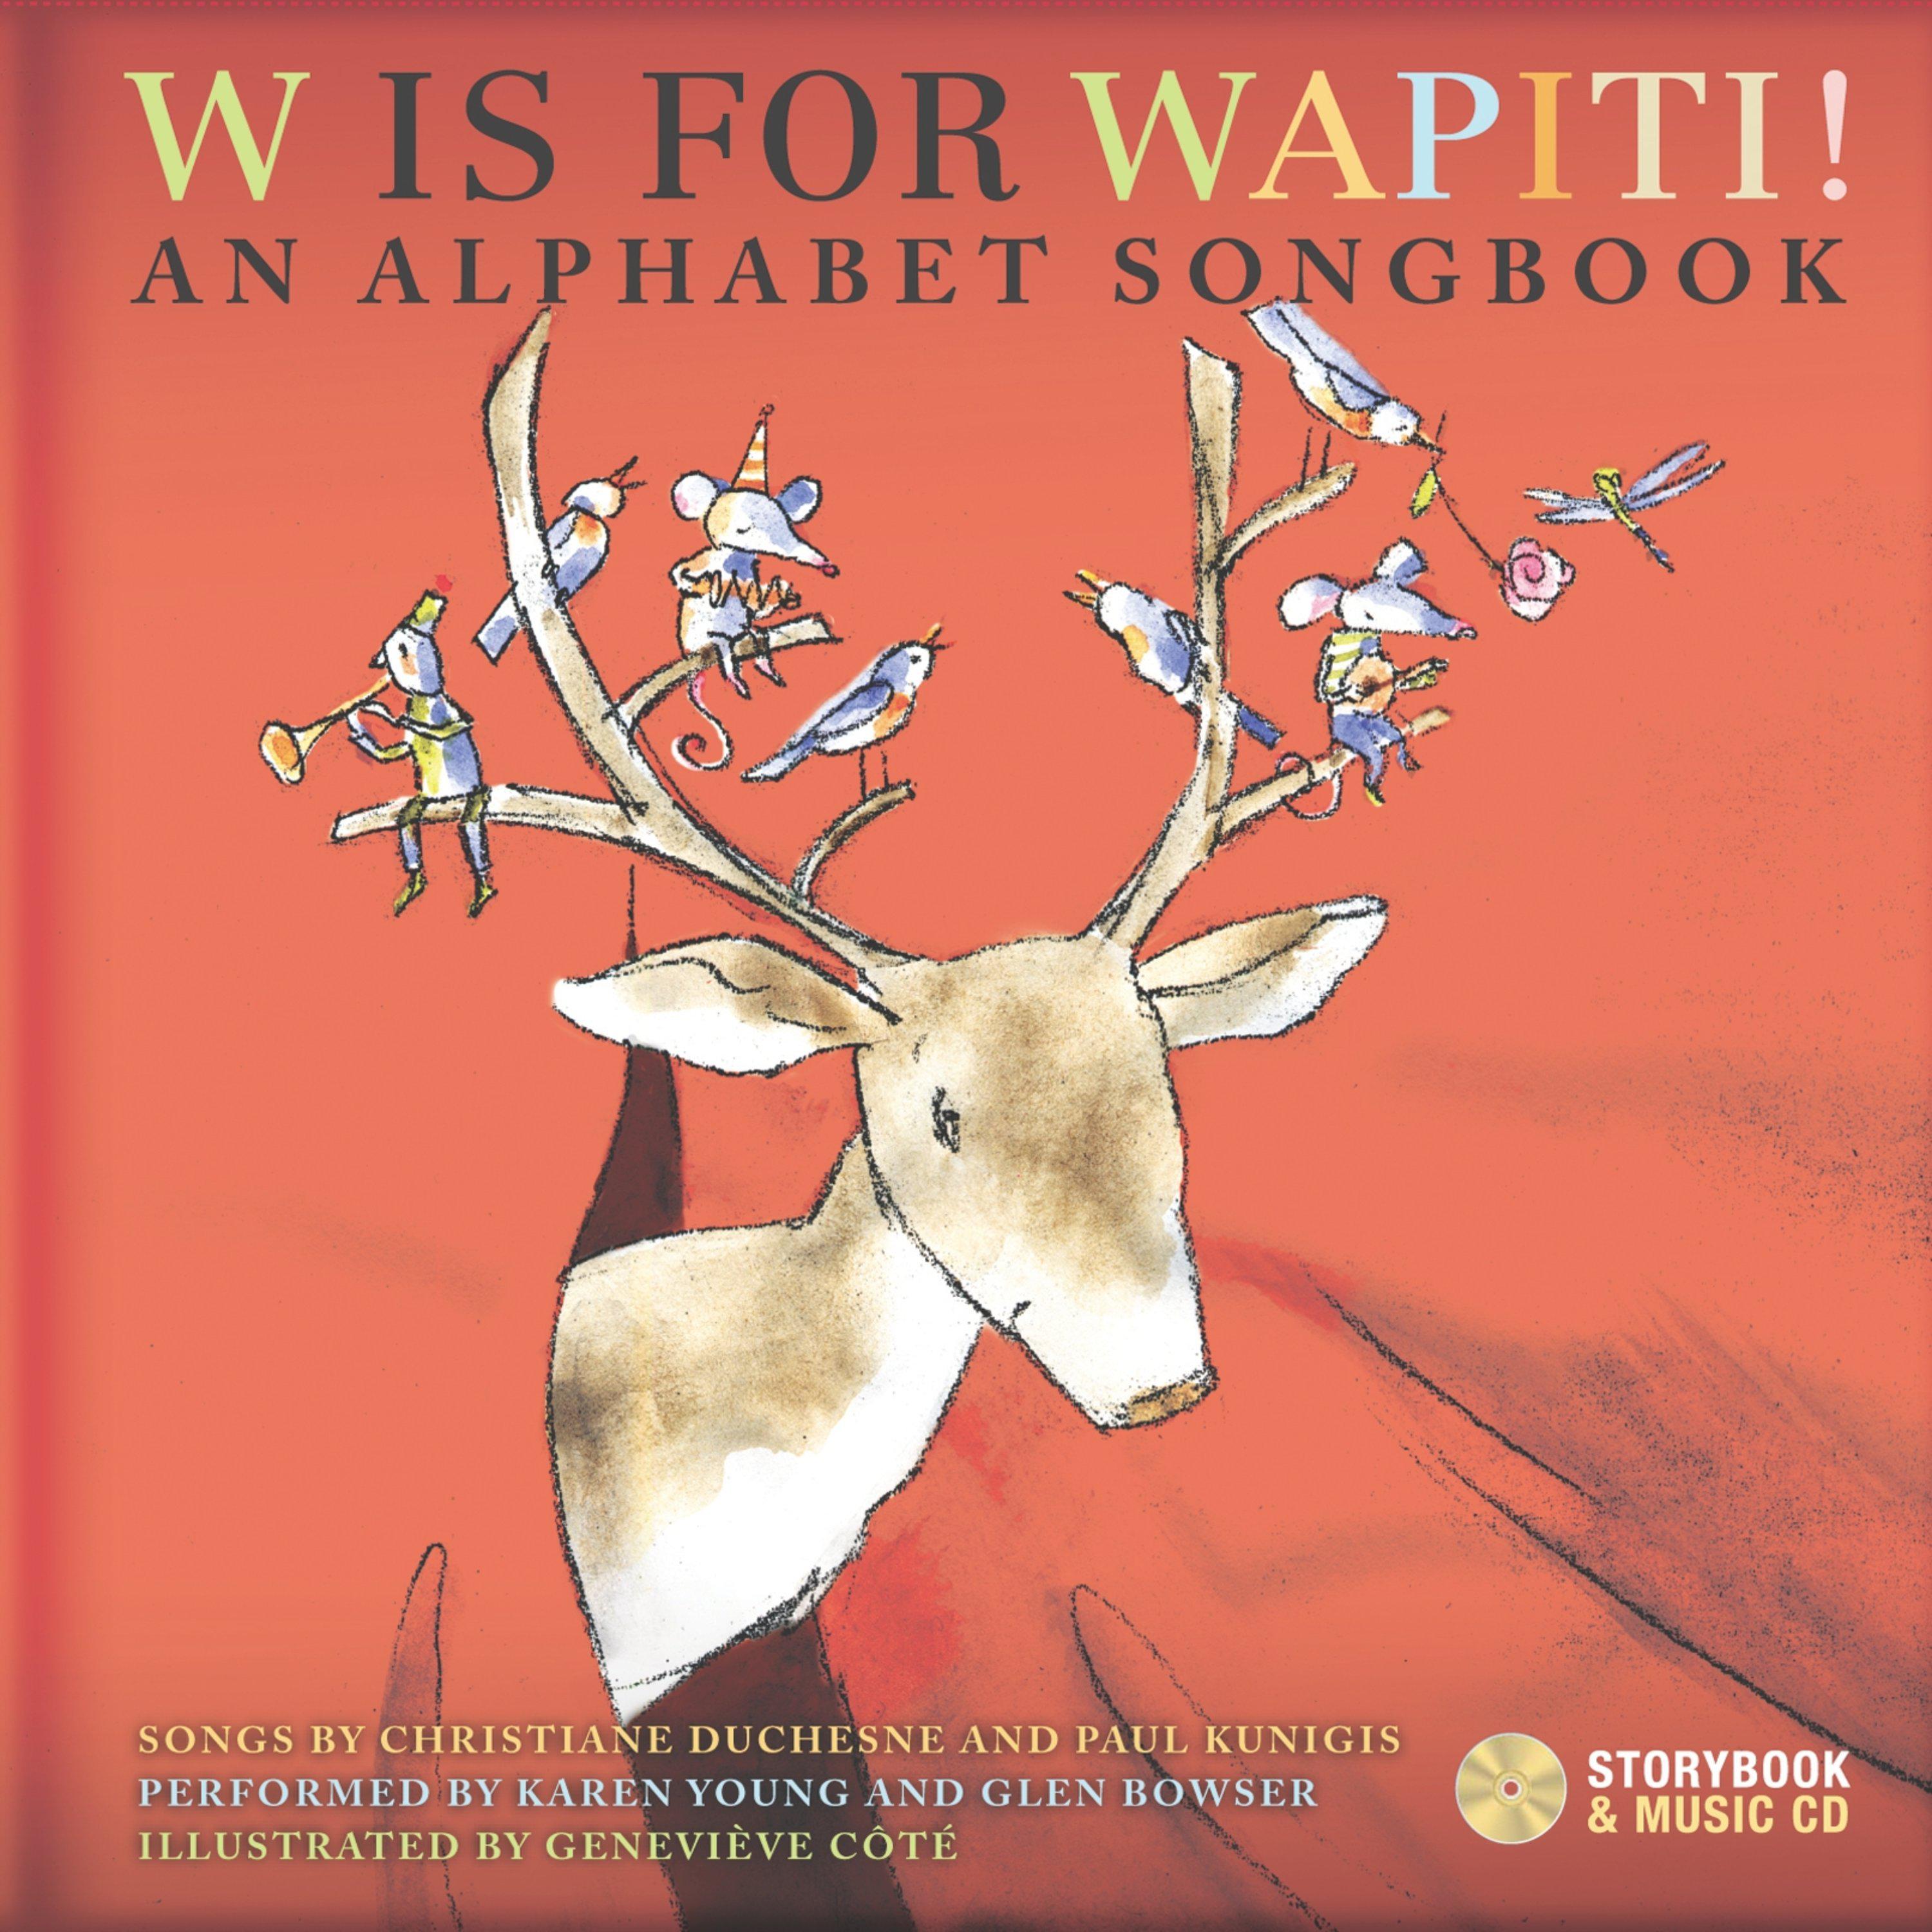 W is for Wapiti ! (An Alphabet Songbook)